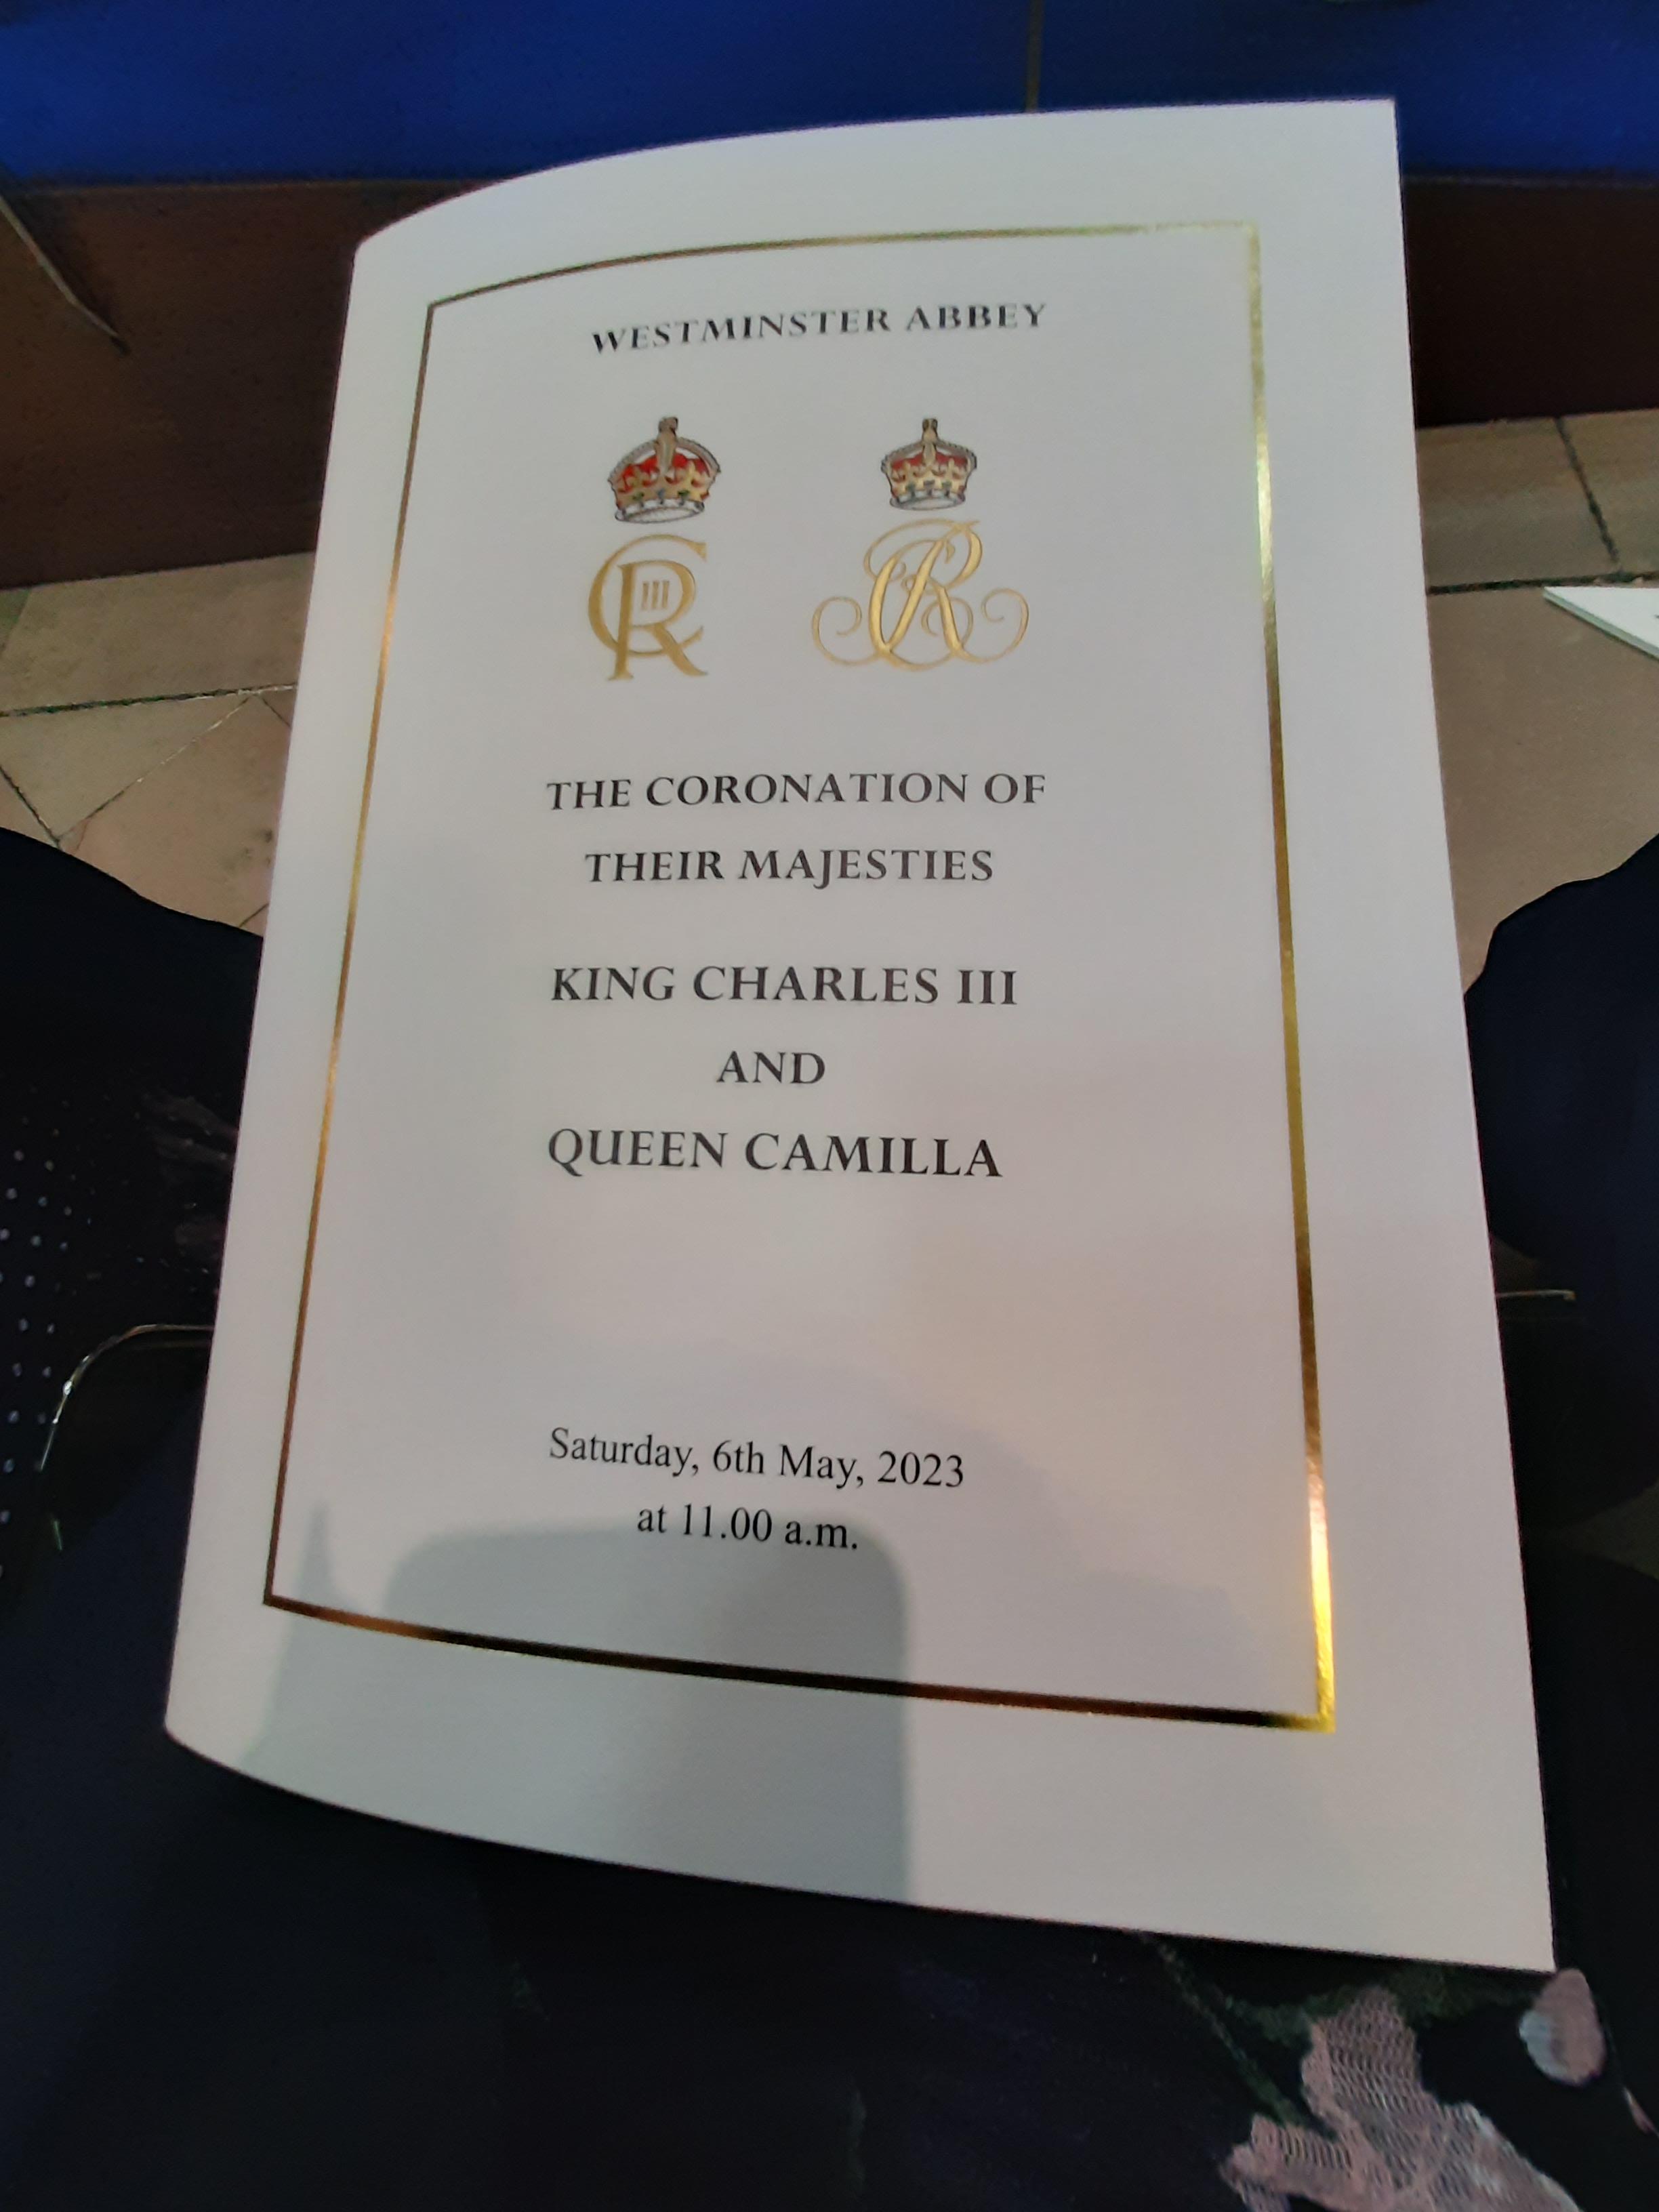 An order of service for the Coronation of King Charles III and Queen Camilla